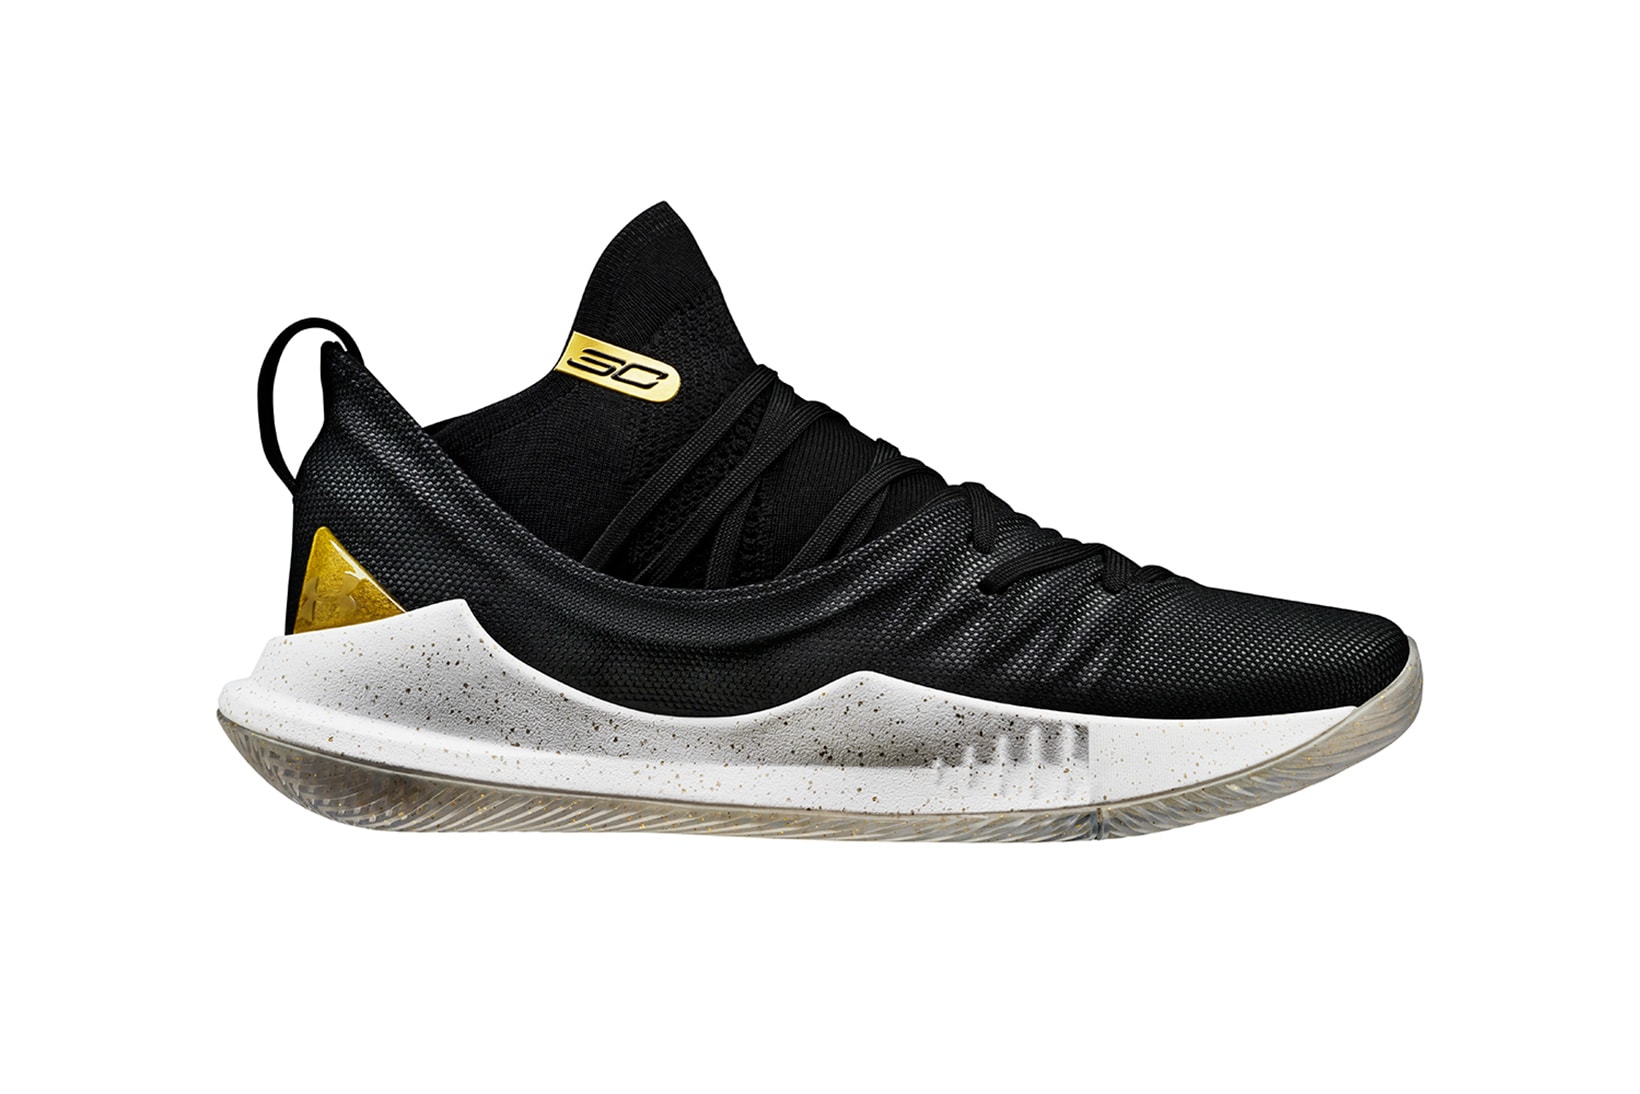 Under Armour Curry 5 Takeover Edition Release Date black gold white gold 2018 june footwear steph curry stephen curry golden state warriors nba